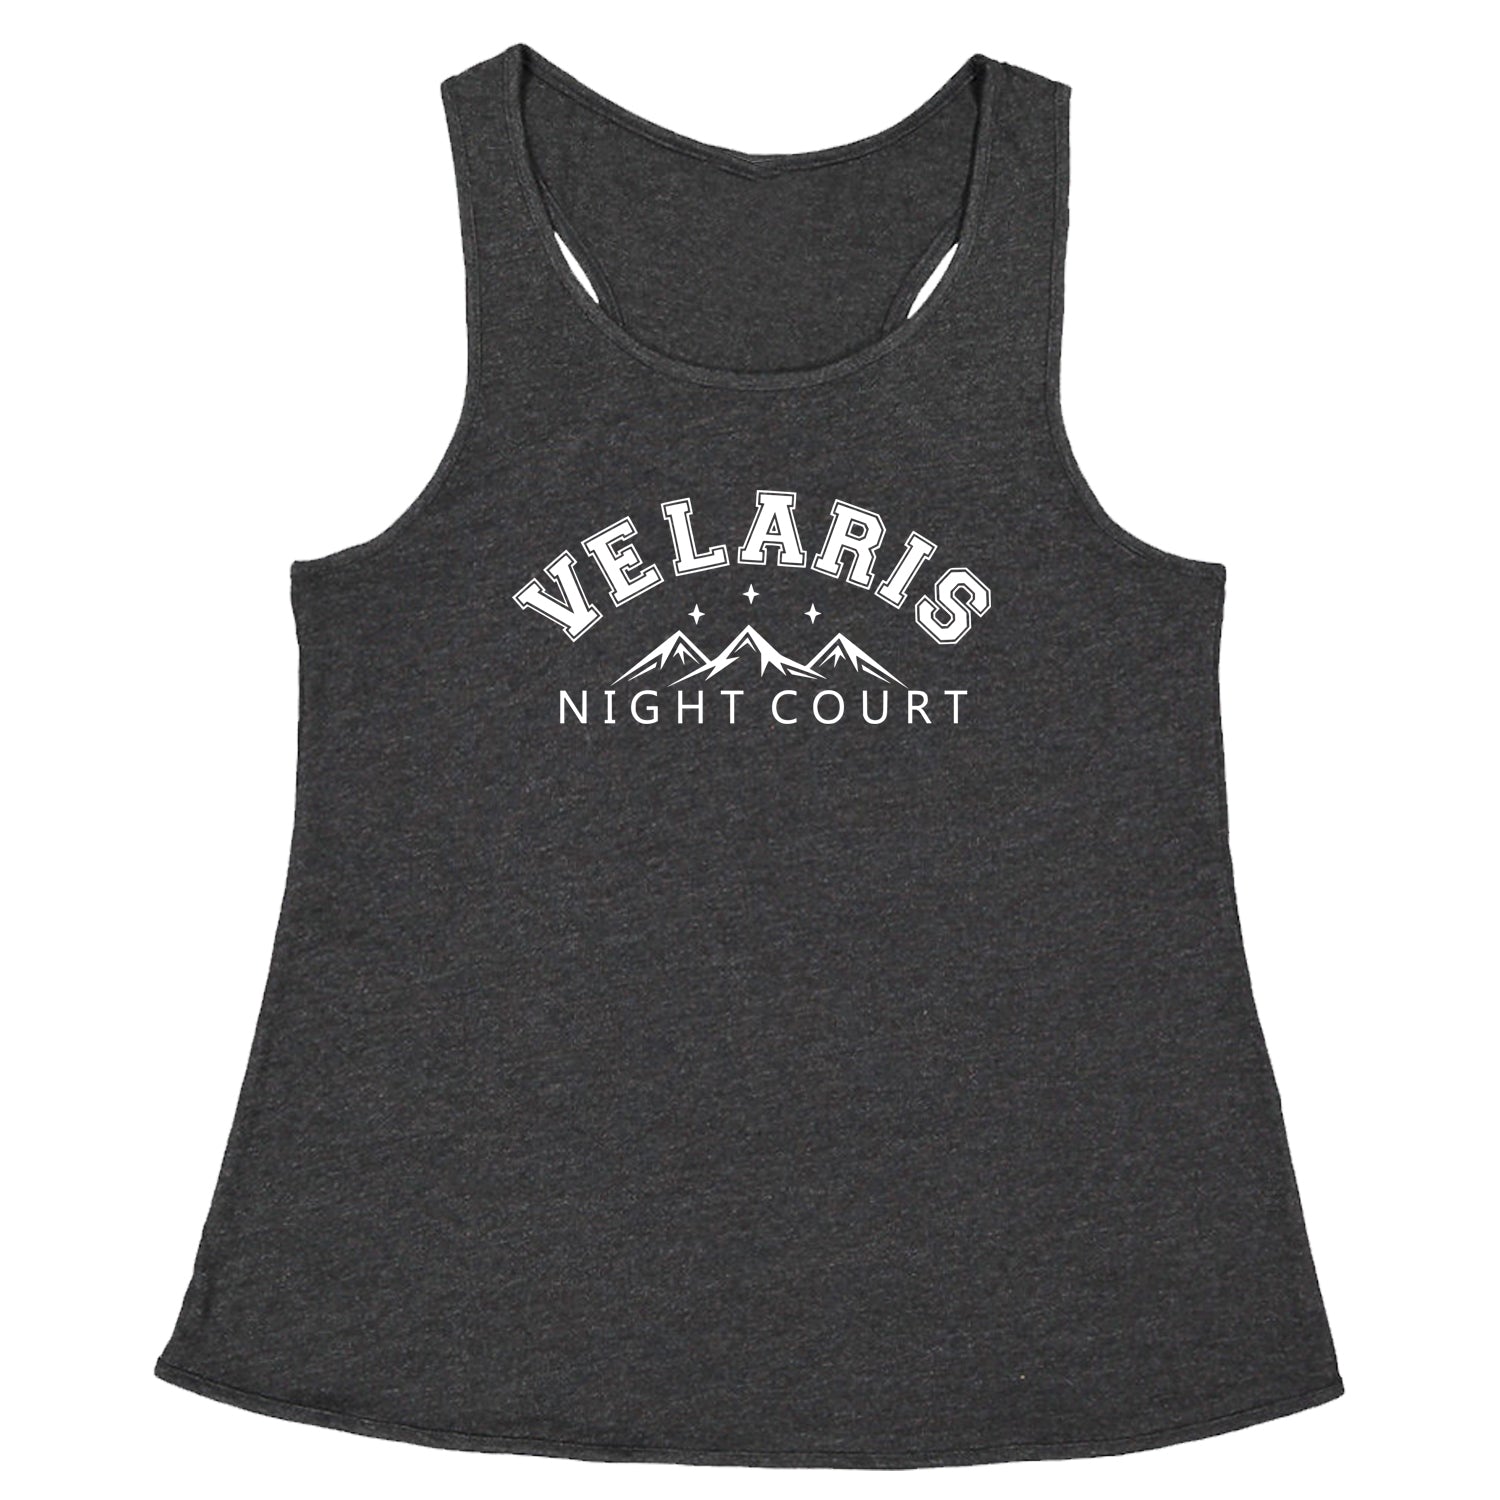 Velaris Night Court Squad Racerback Tank Top for Women acotar, court, illyrian, maas, of, thorns by Expression Tees